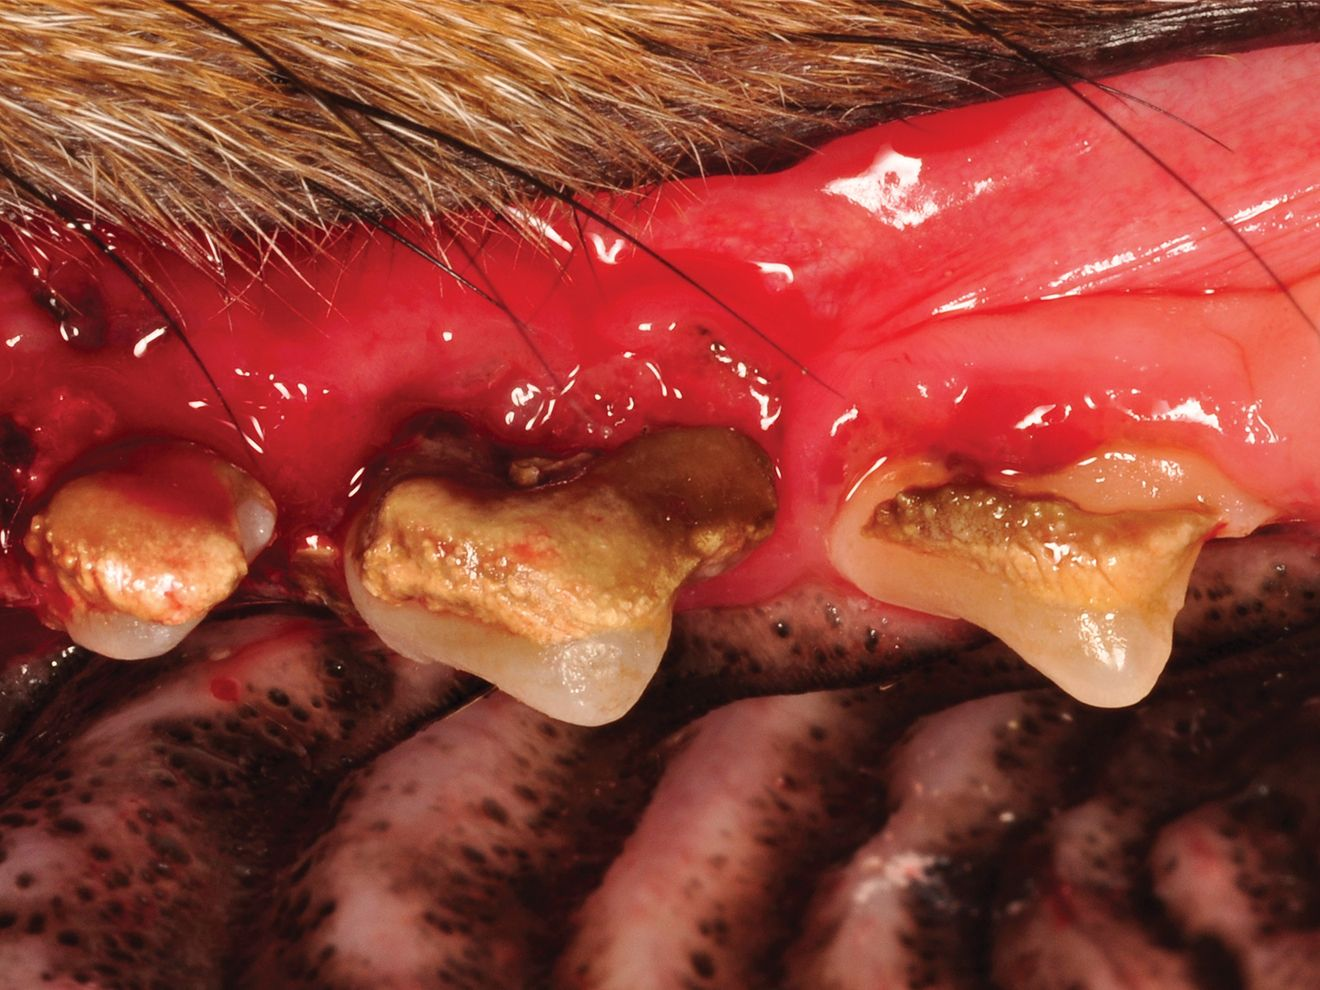 Stage 3 of canine dental disease